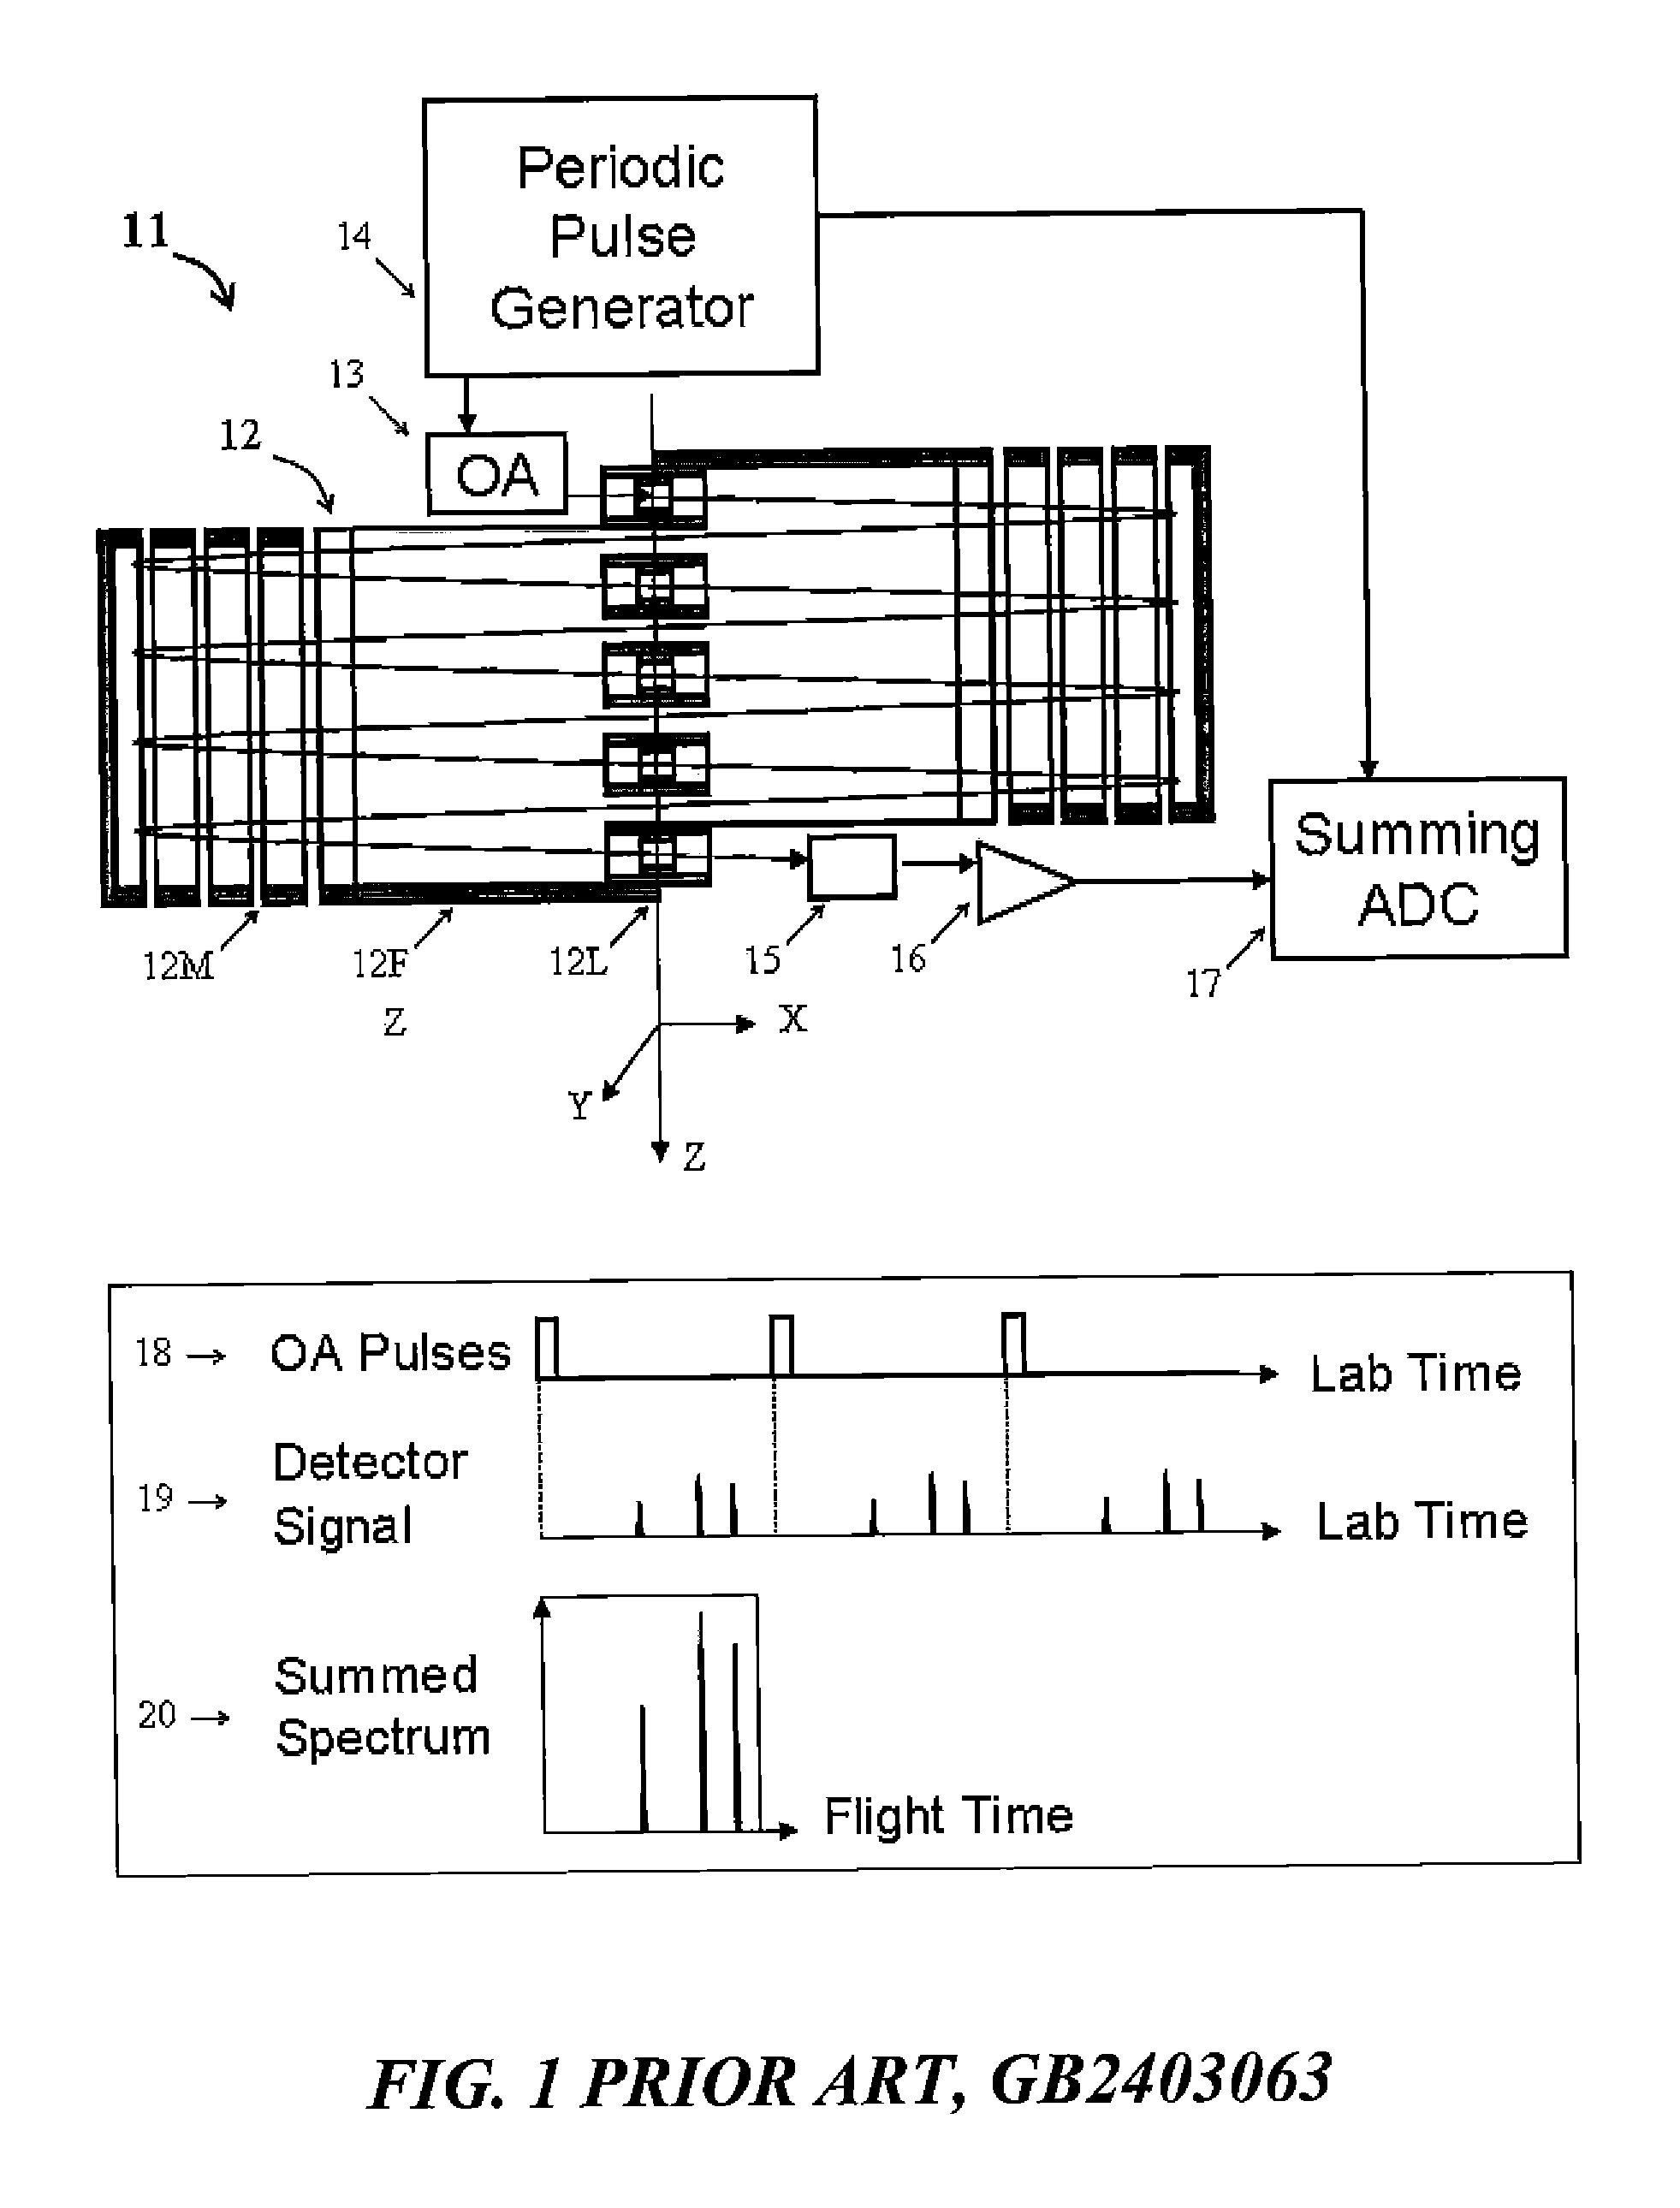 Electrostatic Mass Spectrometer with Encoded Frequent Pulses